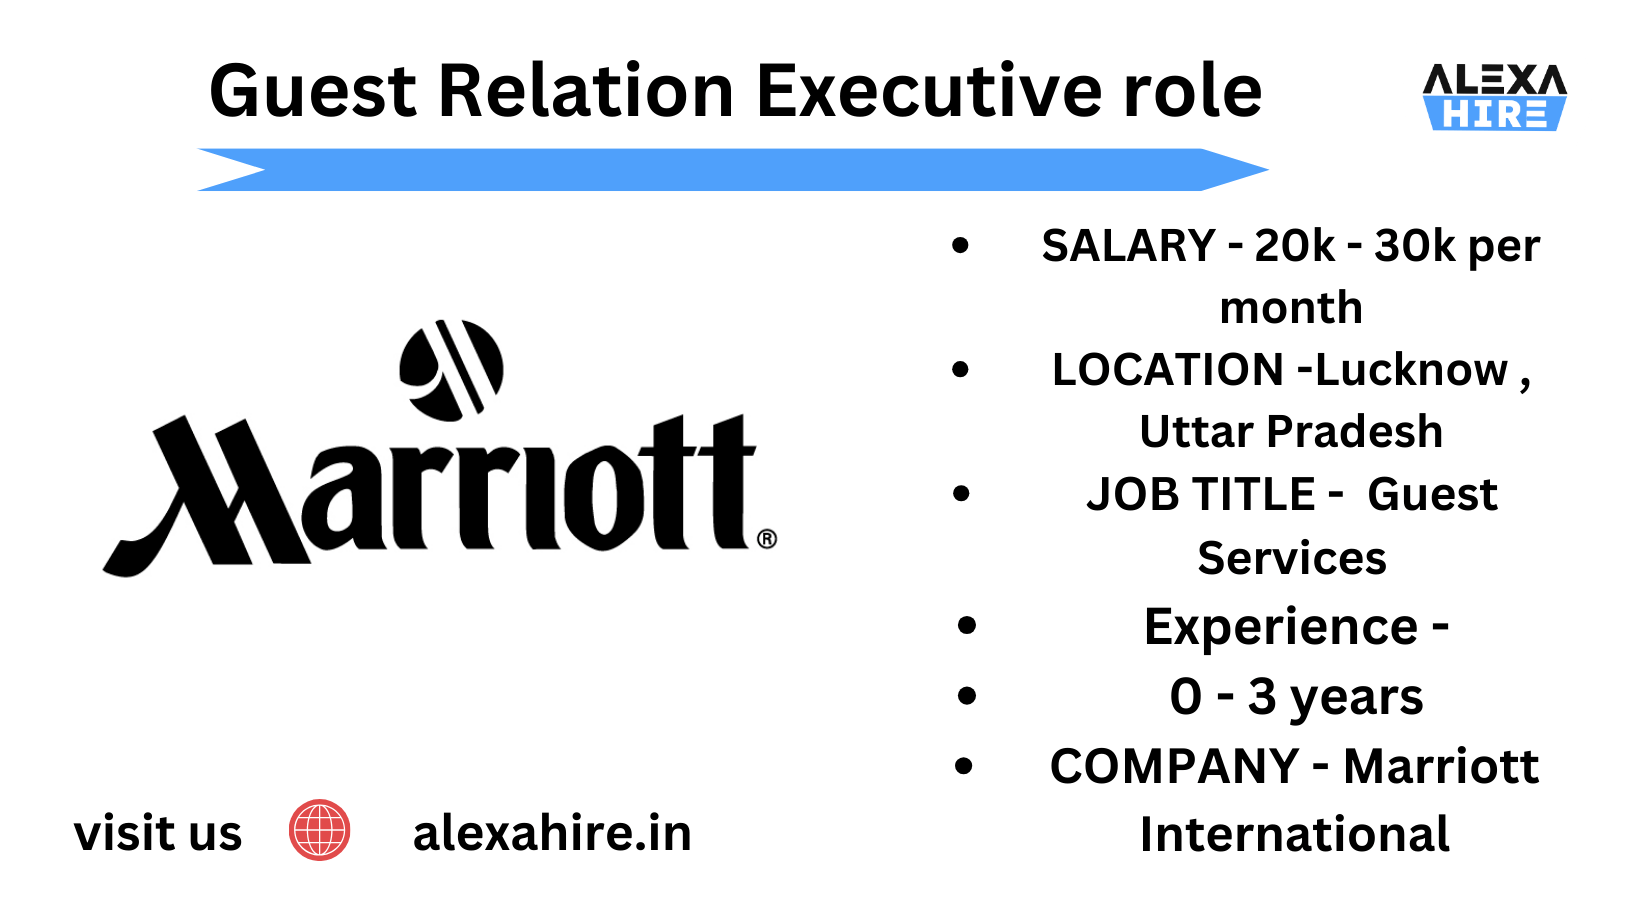 Guest Relation Executive role